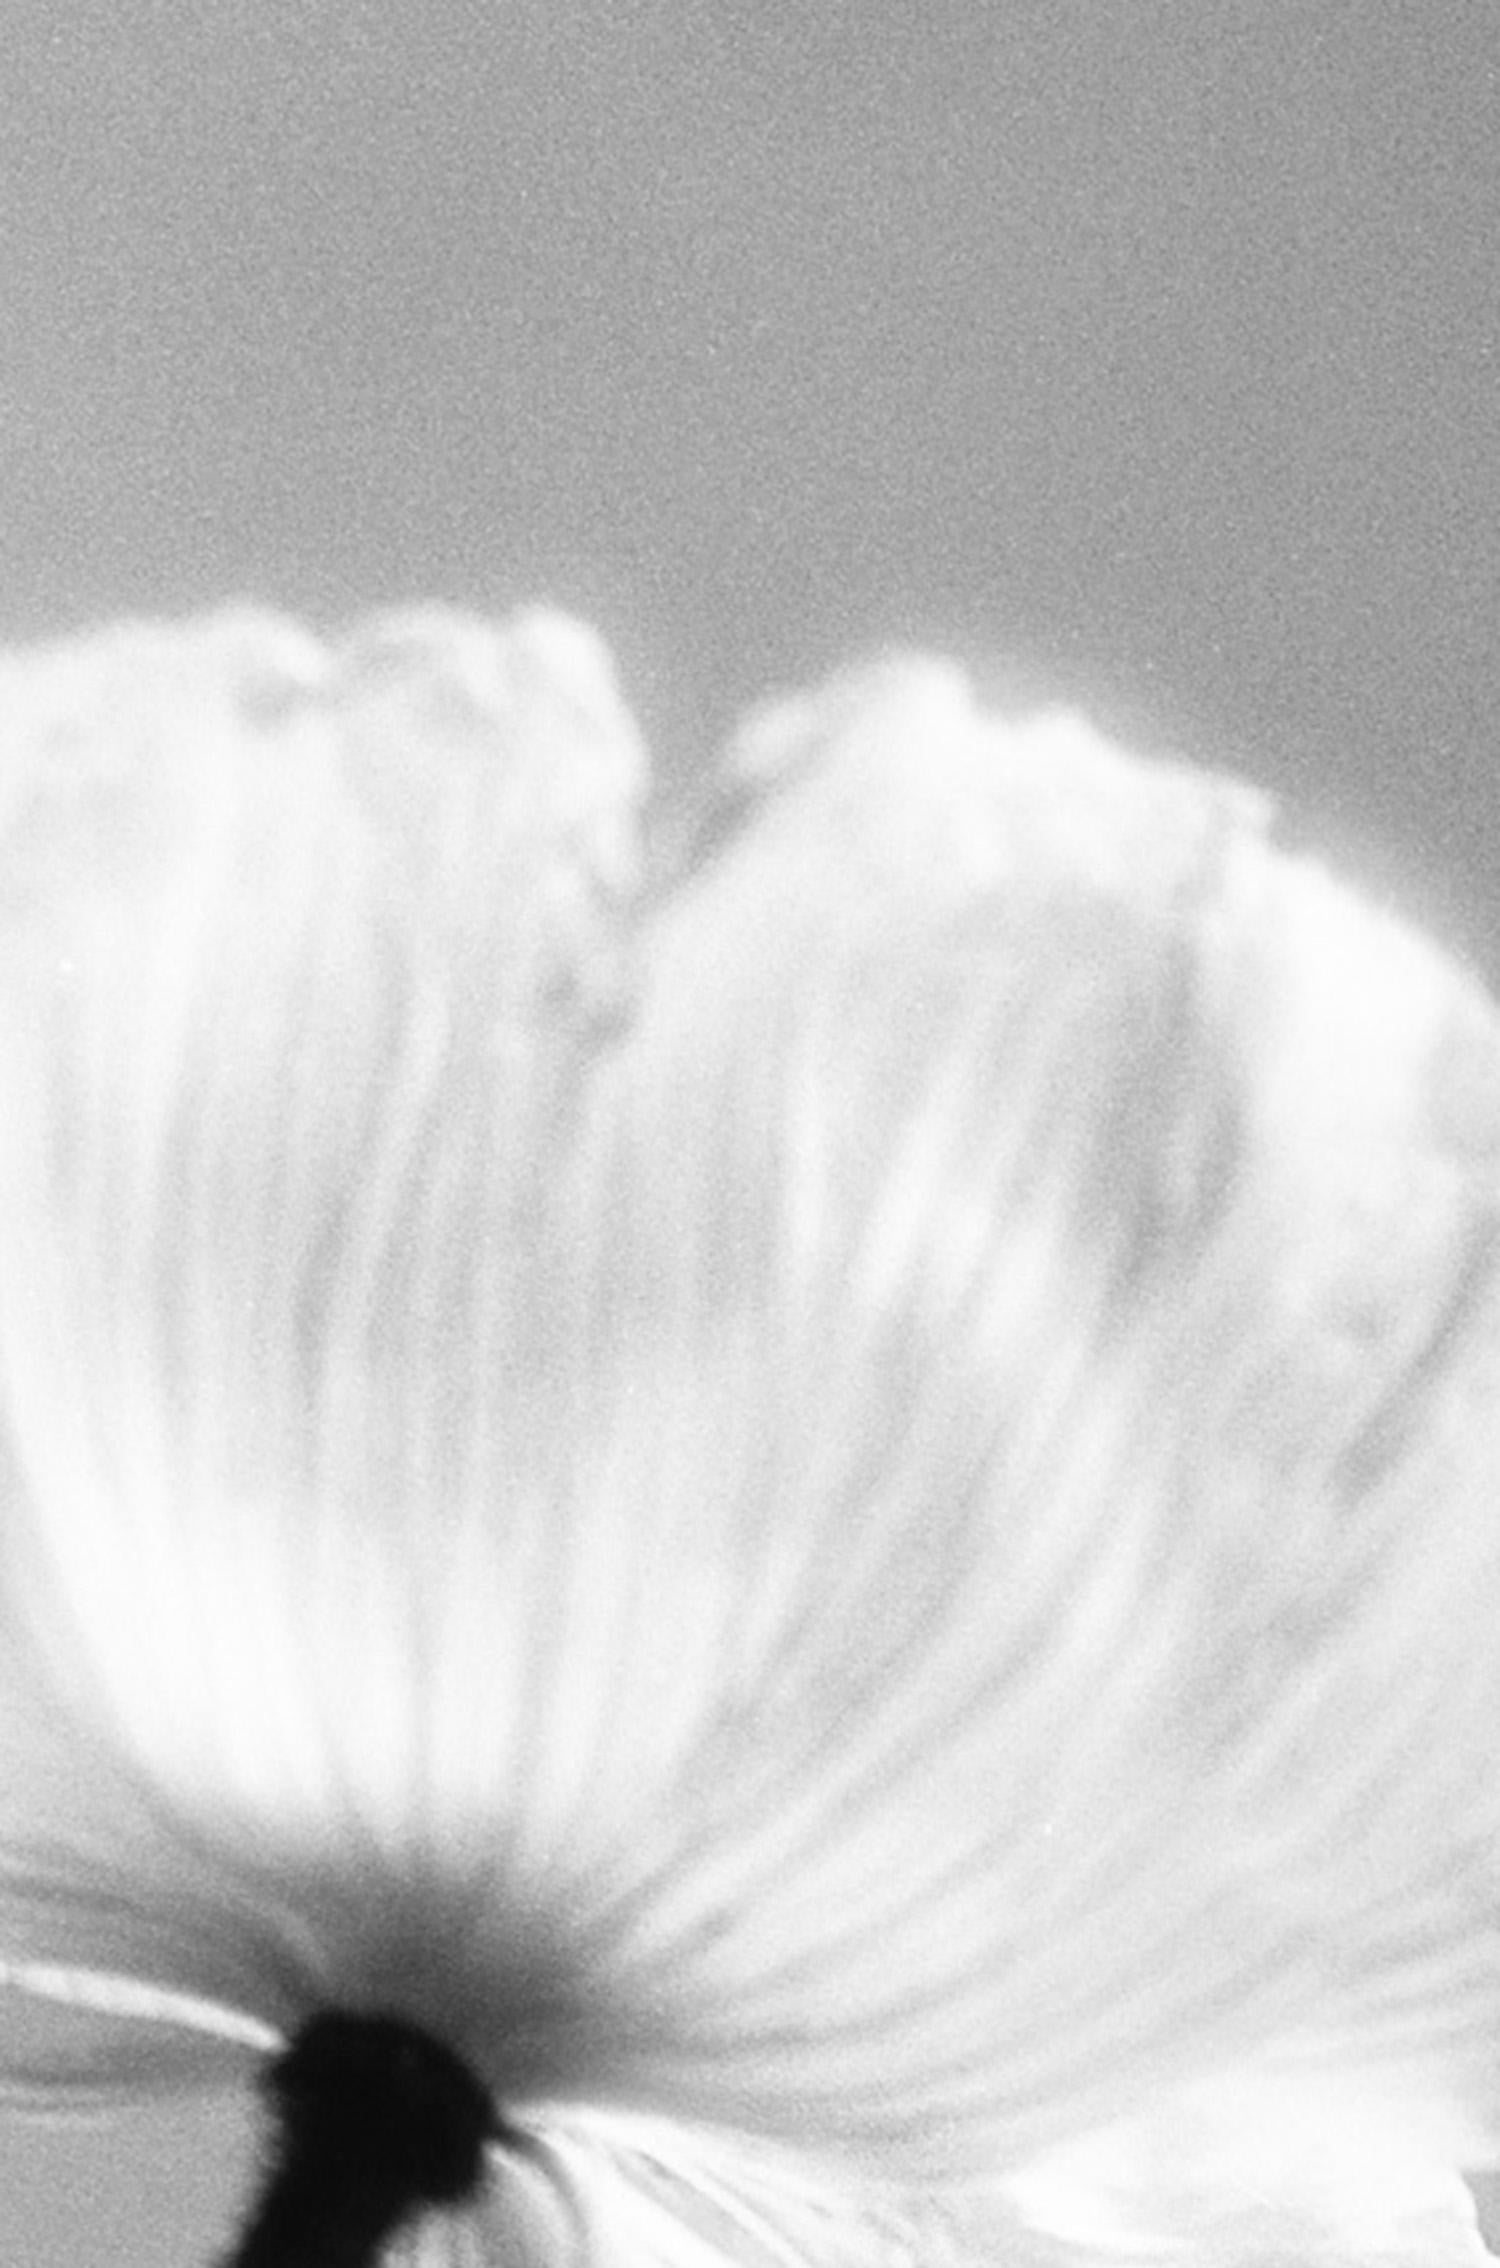 Poppy No.3 - Analogue black and white floral photography, Limited edition of 20. 1